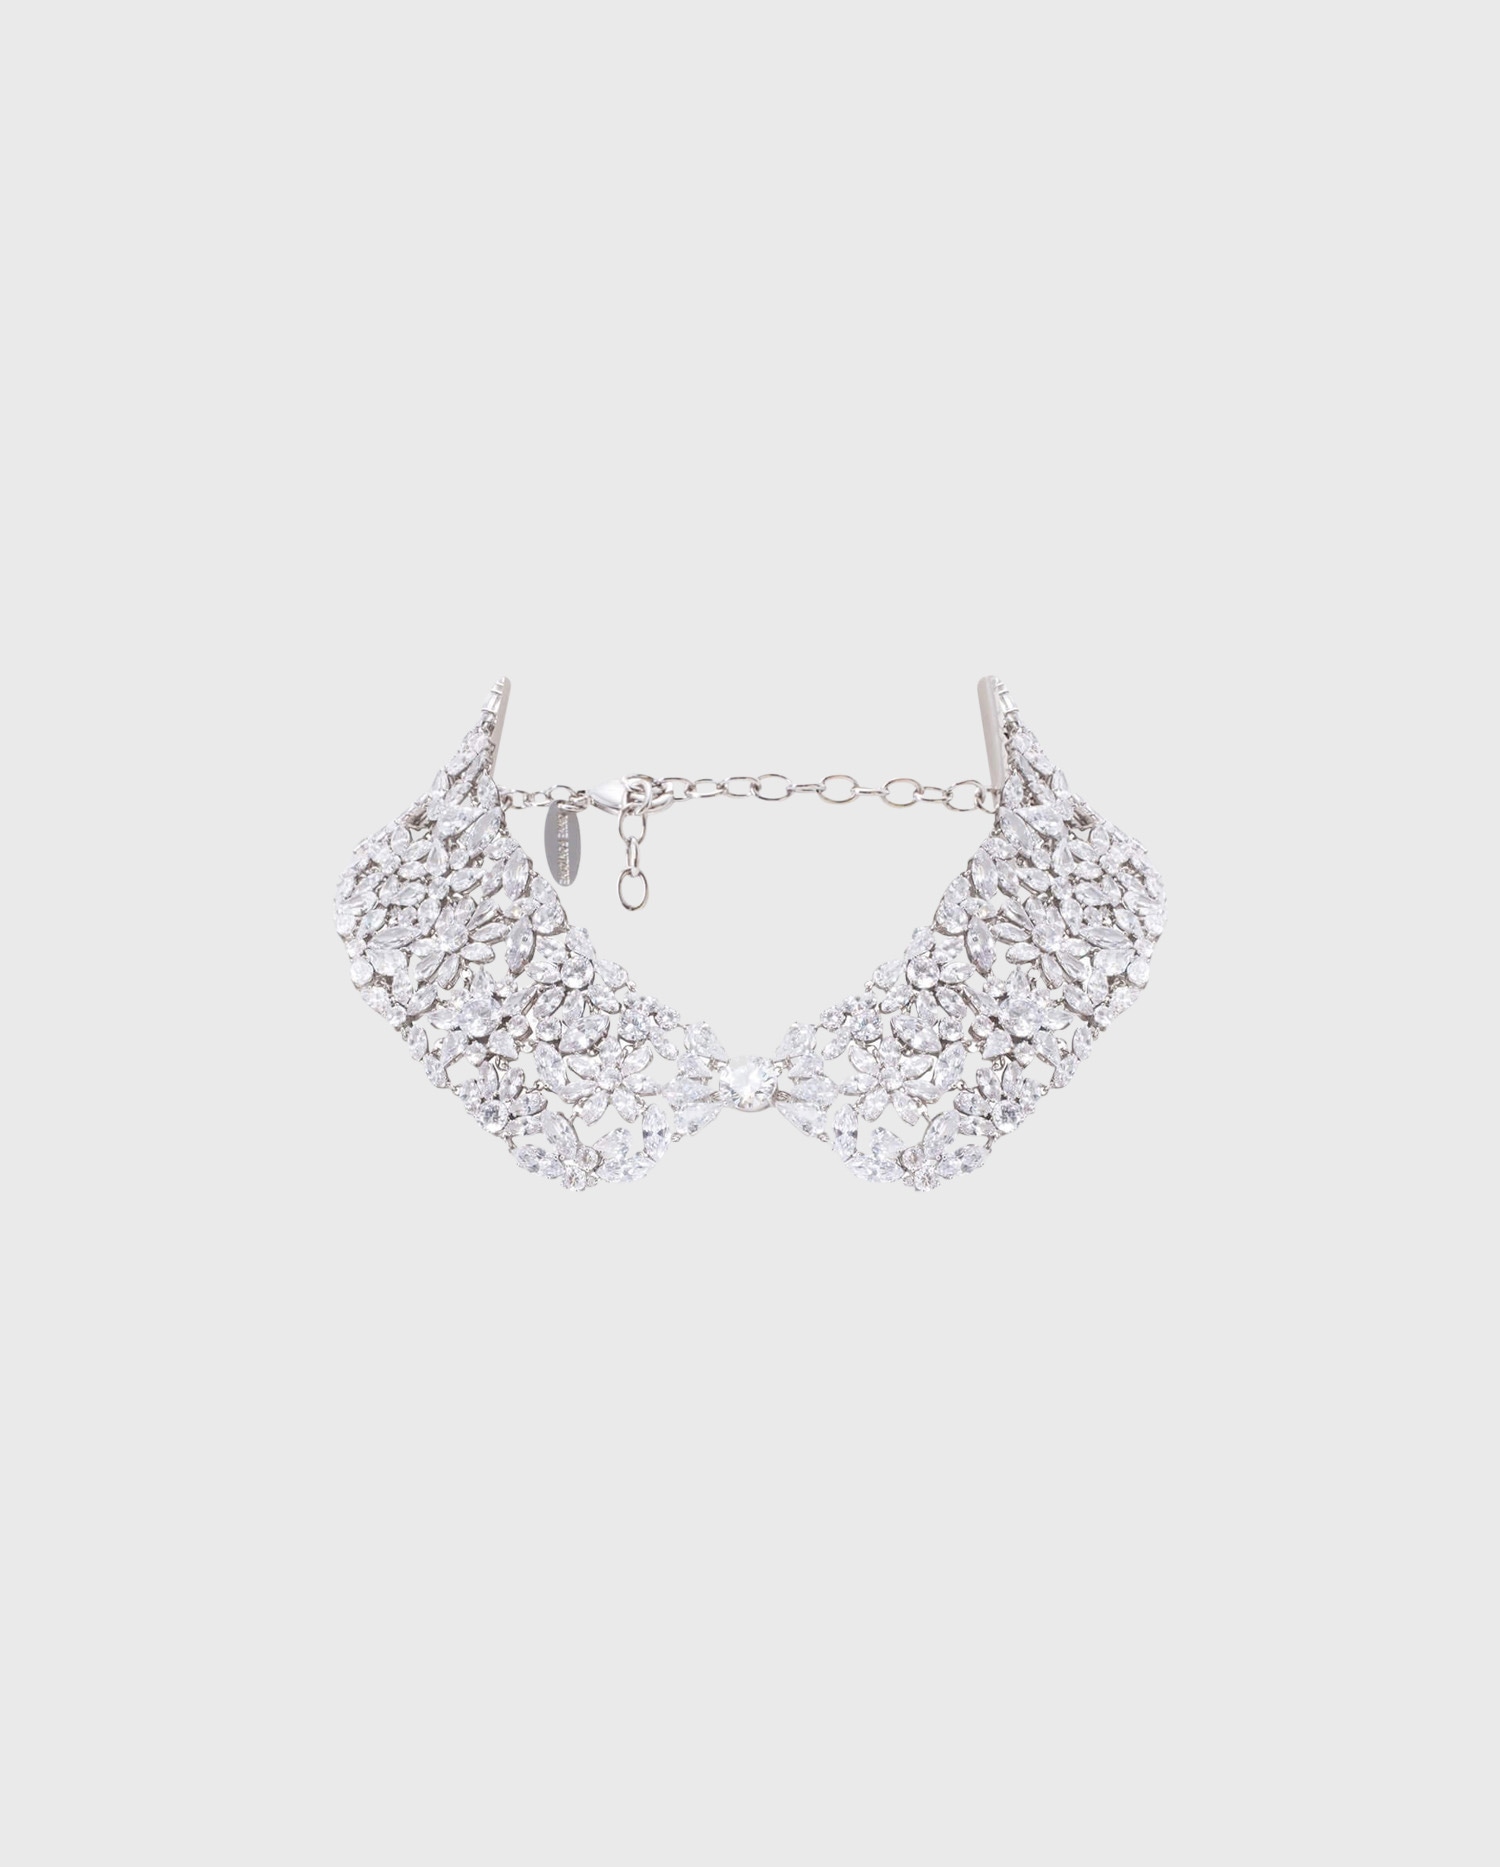 Shop the CAROLINA Silver collar adorned with multiple crystals from ANNE FONTAINE